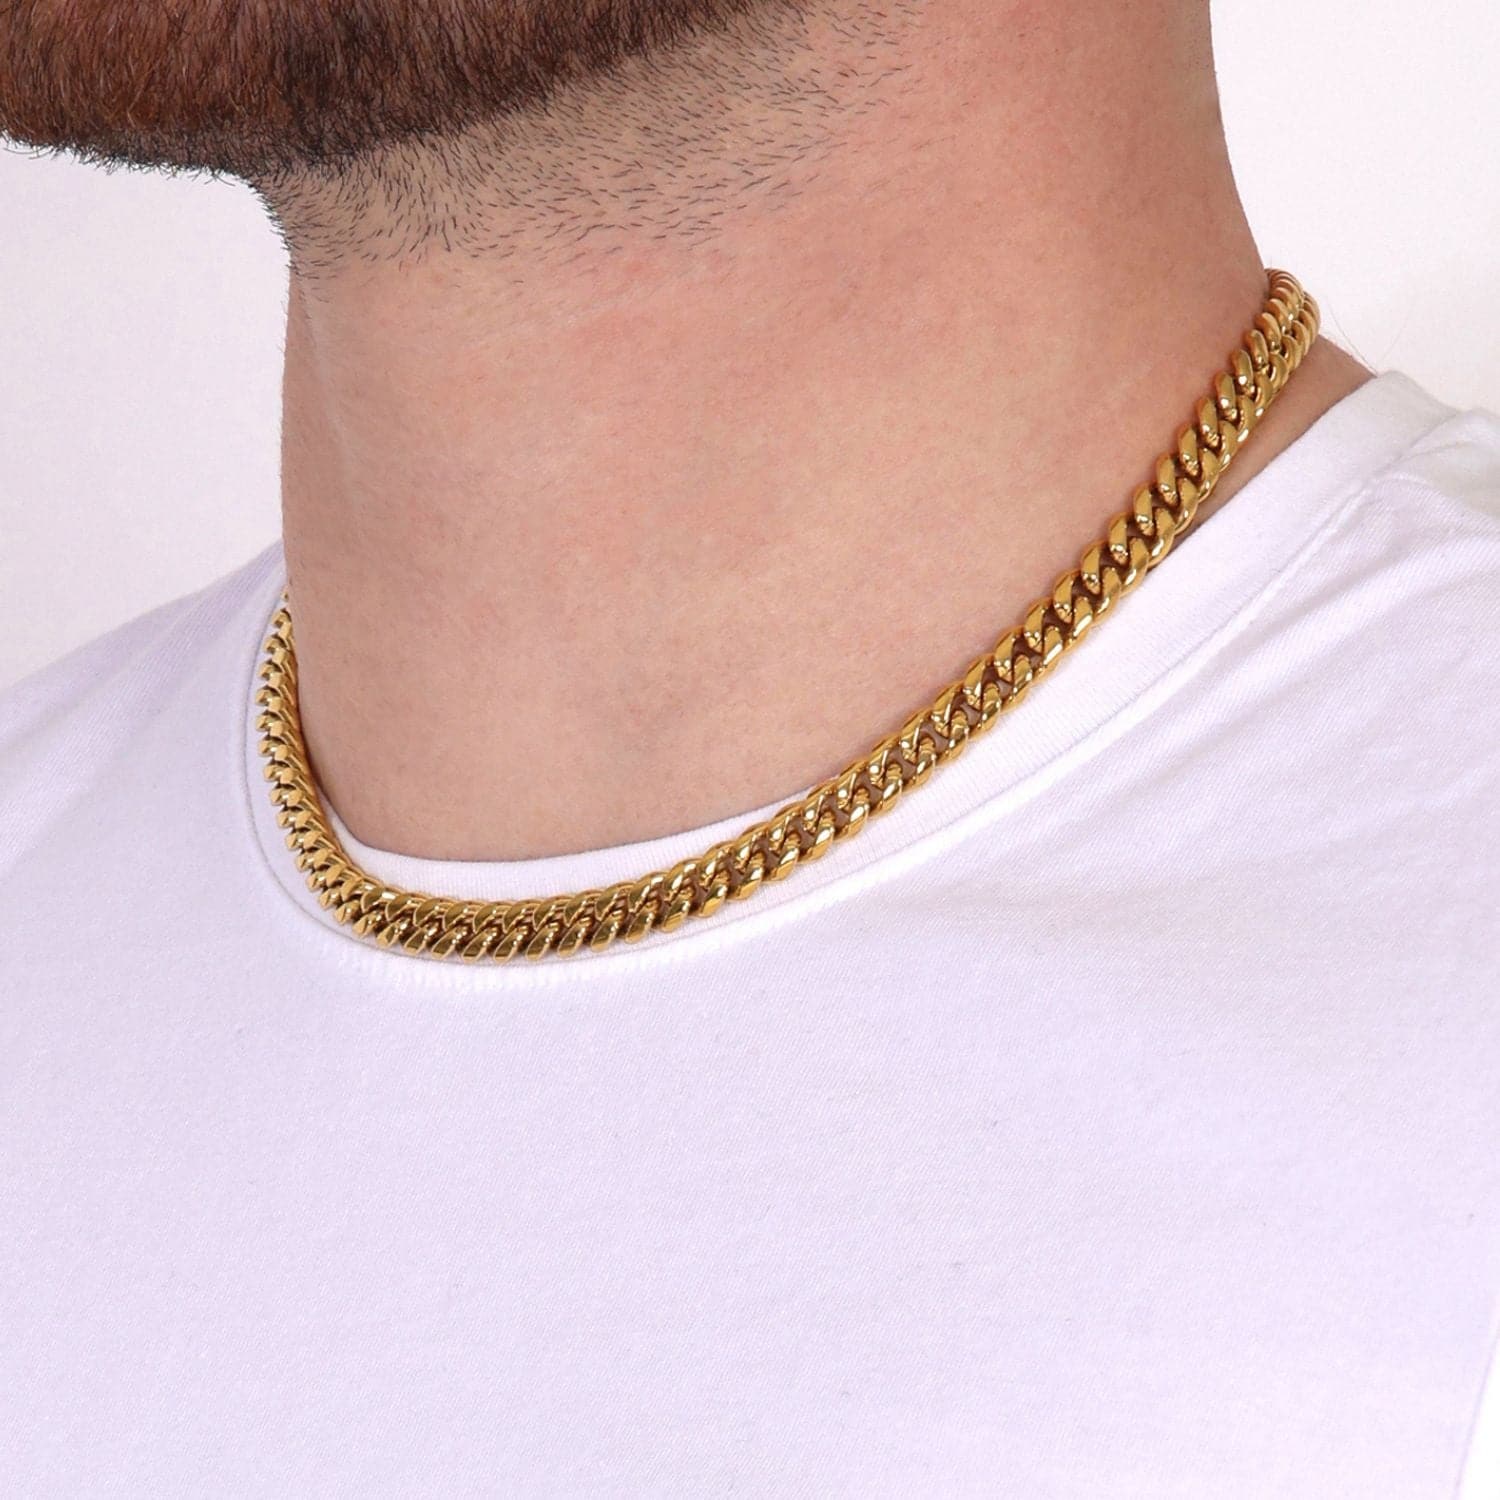 CUBAN CHAIN. - (GOLD Plated) 8MM